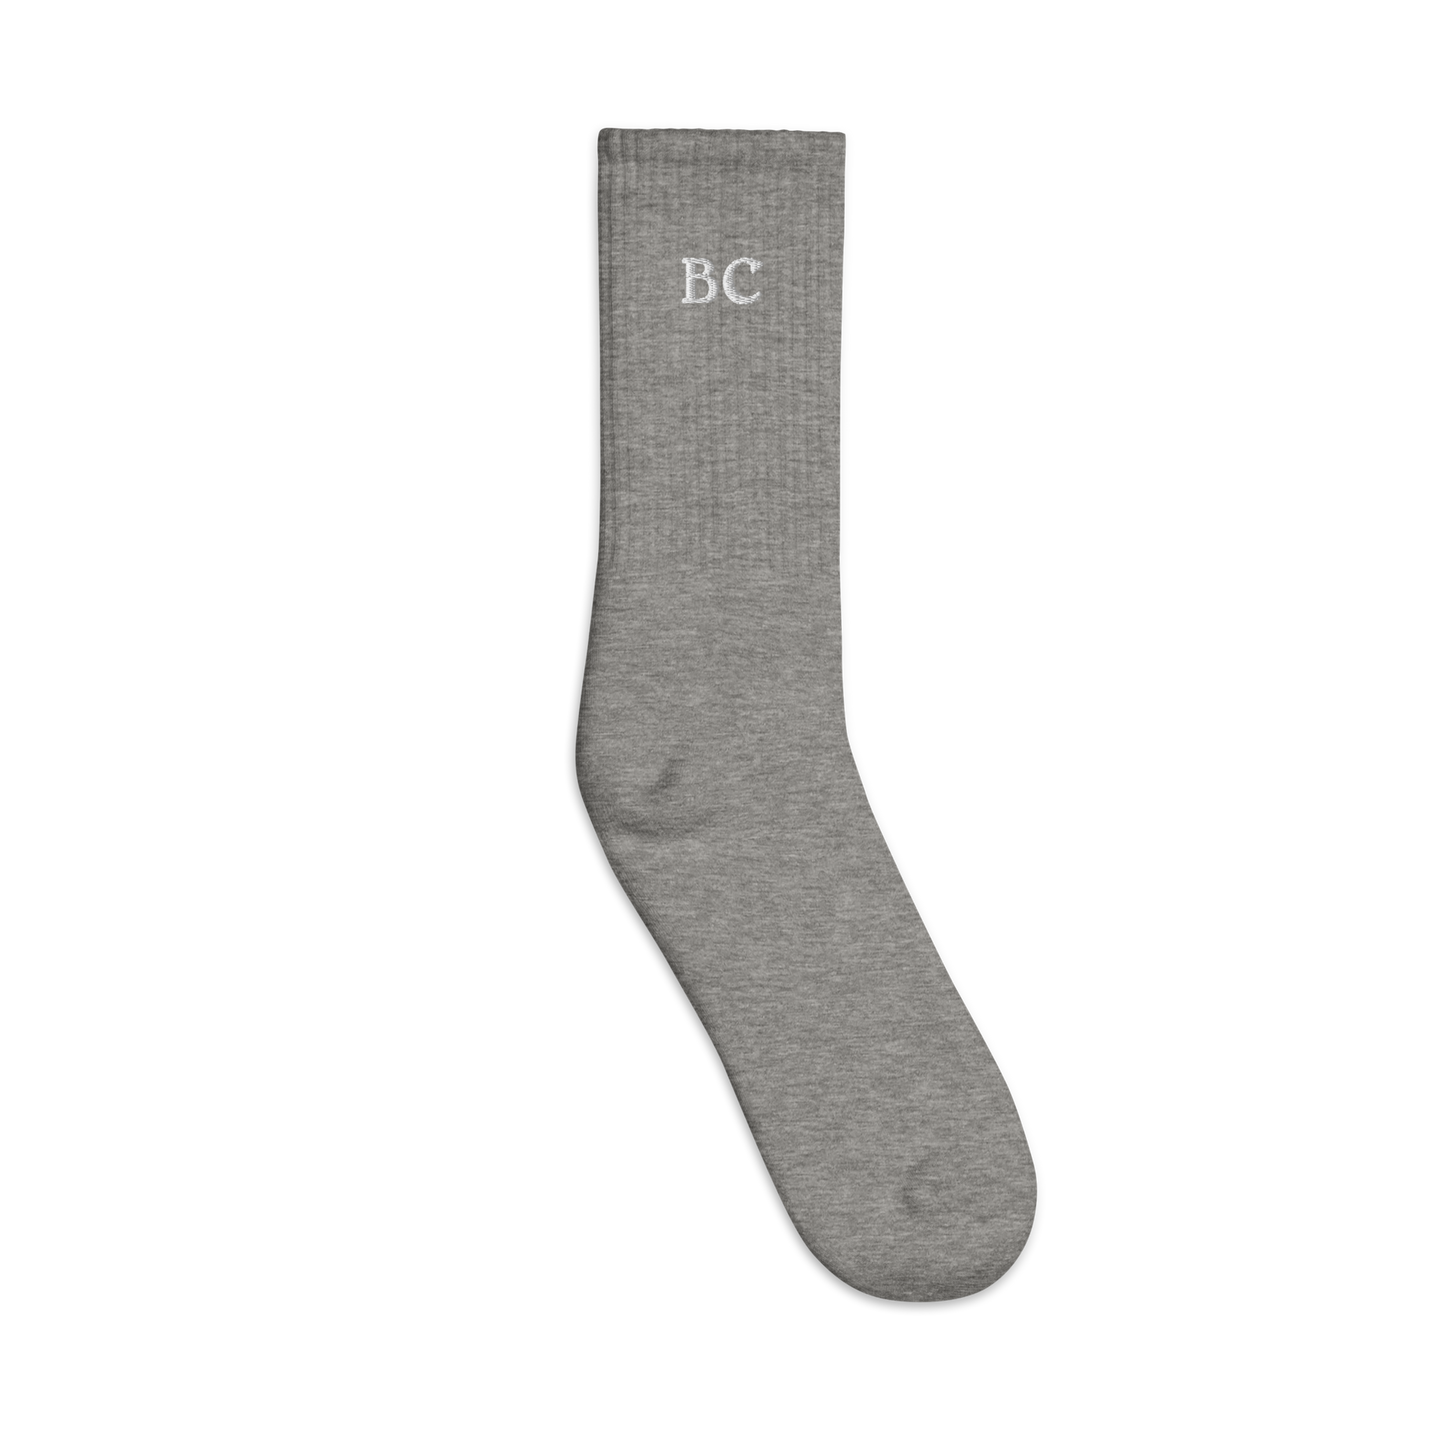 Copy of Personalised Embroidered Socks Initials